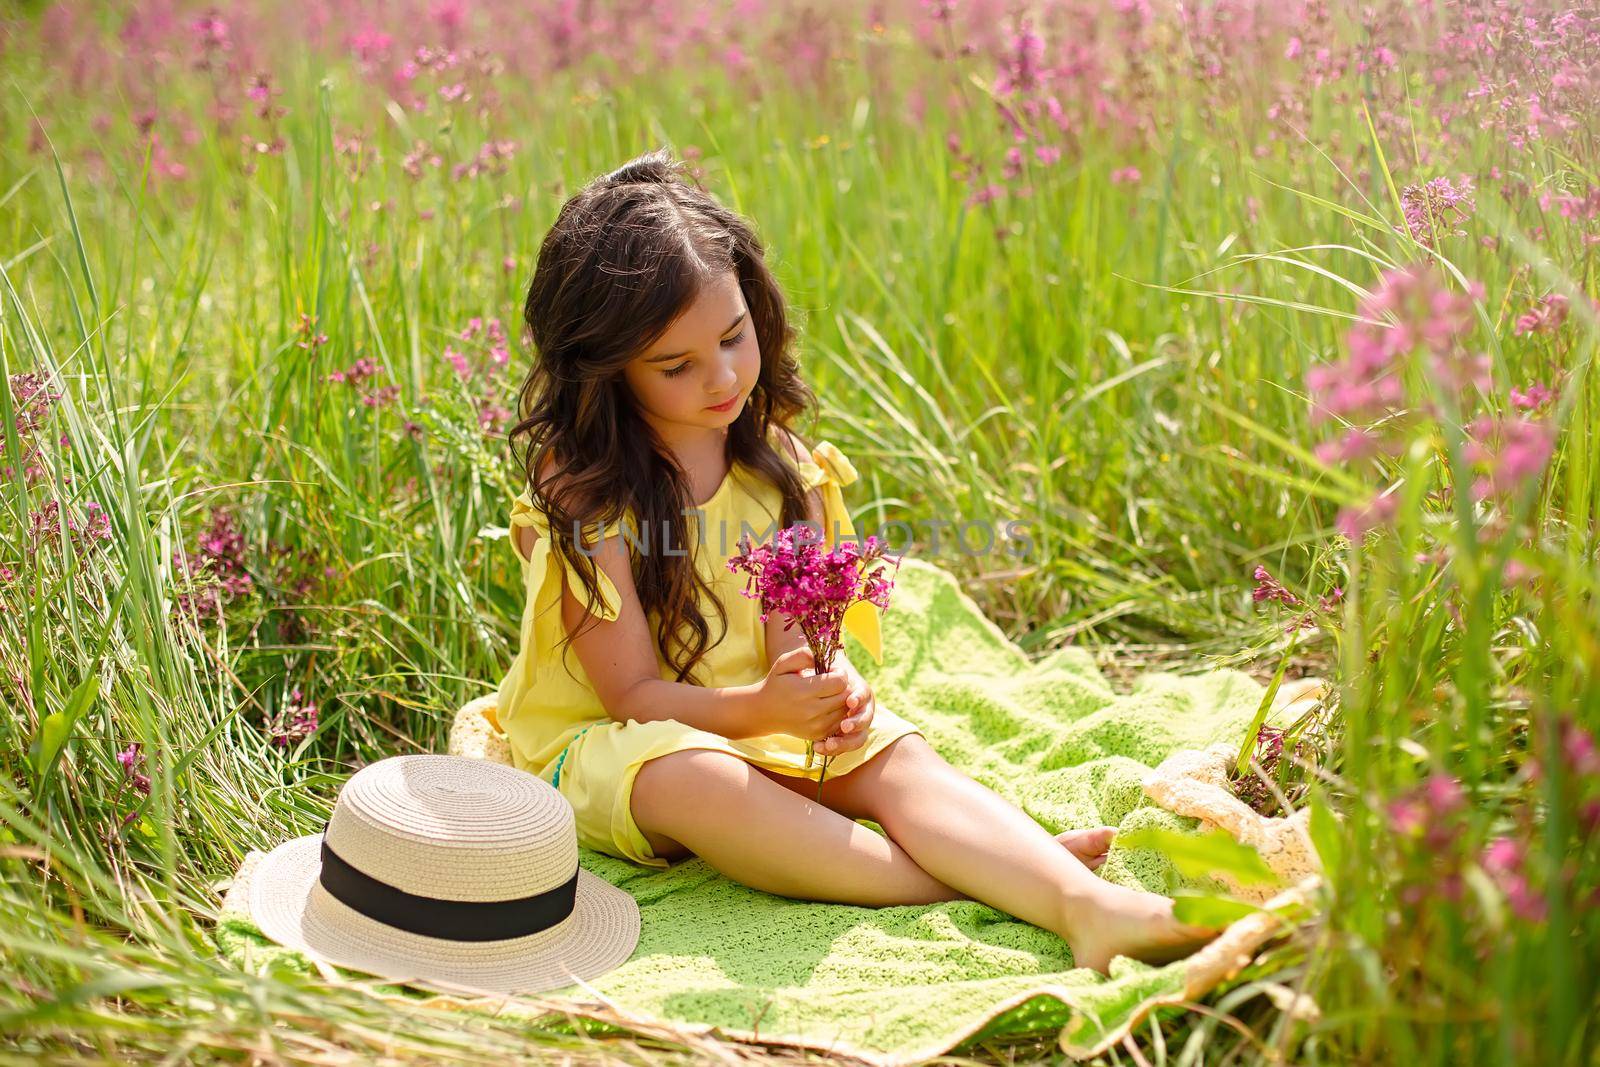 A beautiful little girl 4-5 years old, with long dark hair, sits on a green knitted plaid, in a yellow dress sits in a field with grass and burgundy viscaria flowers in summer. copy space